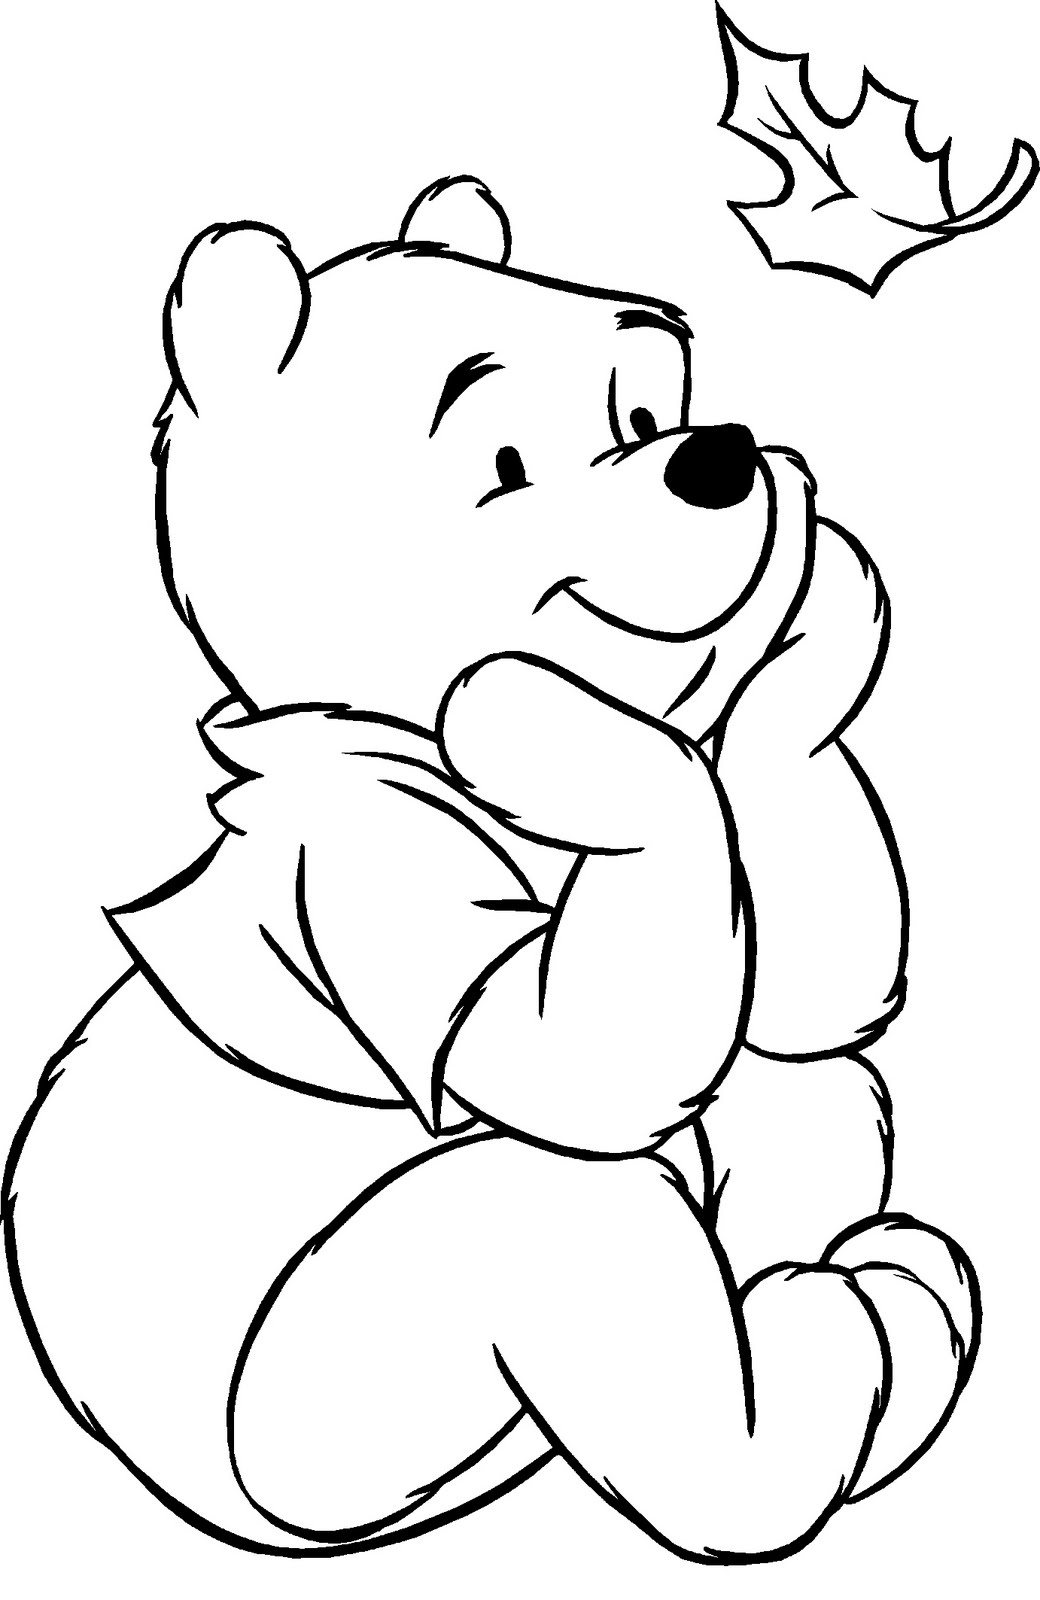 winnie the pooh coloring book download winnie the pooh thanksgiving coloring pages kentscraft the download winnie pooh book coloring 